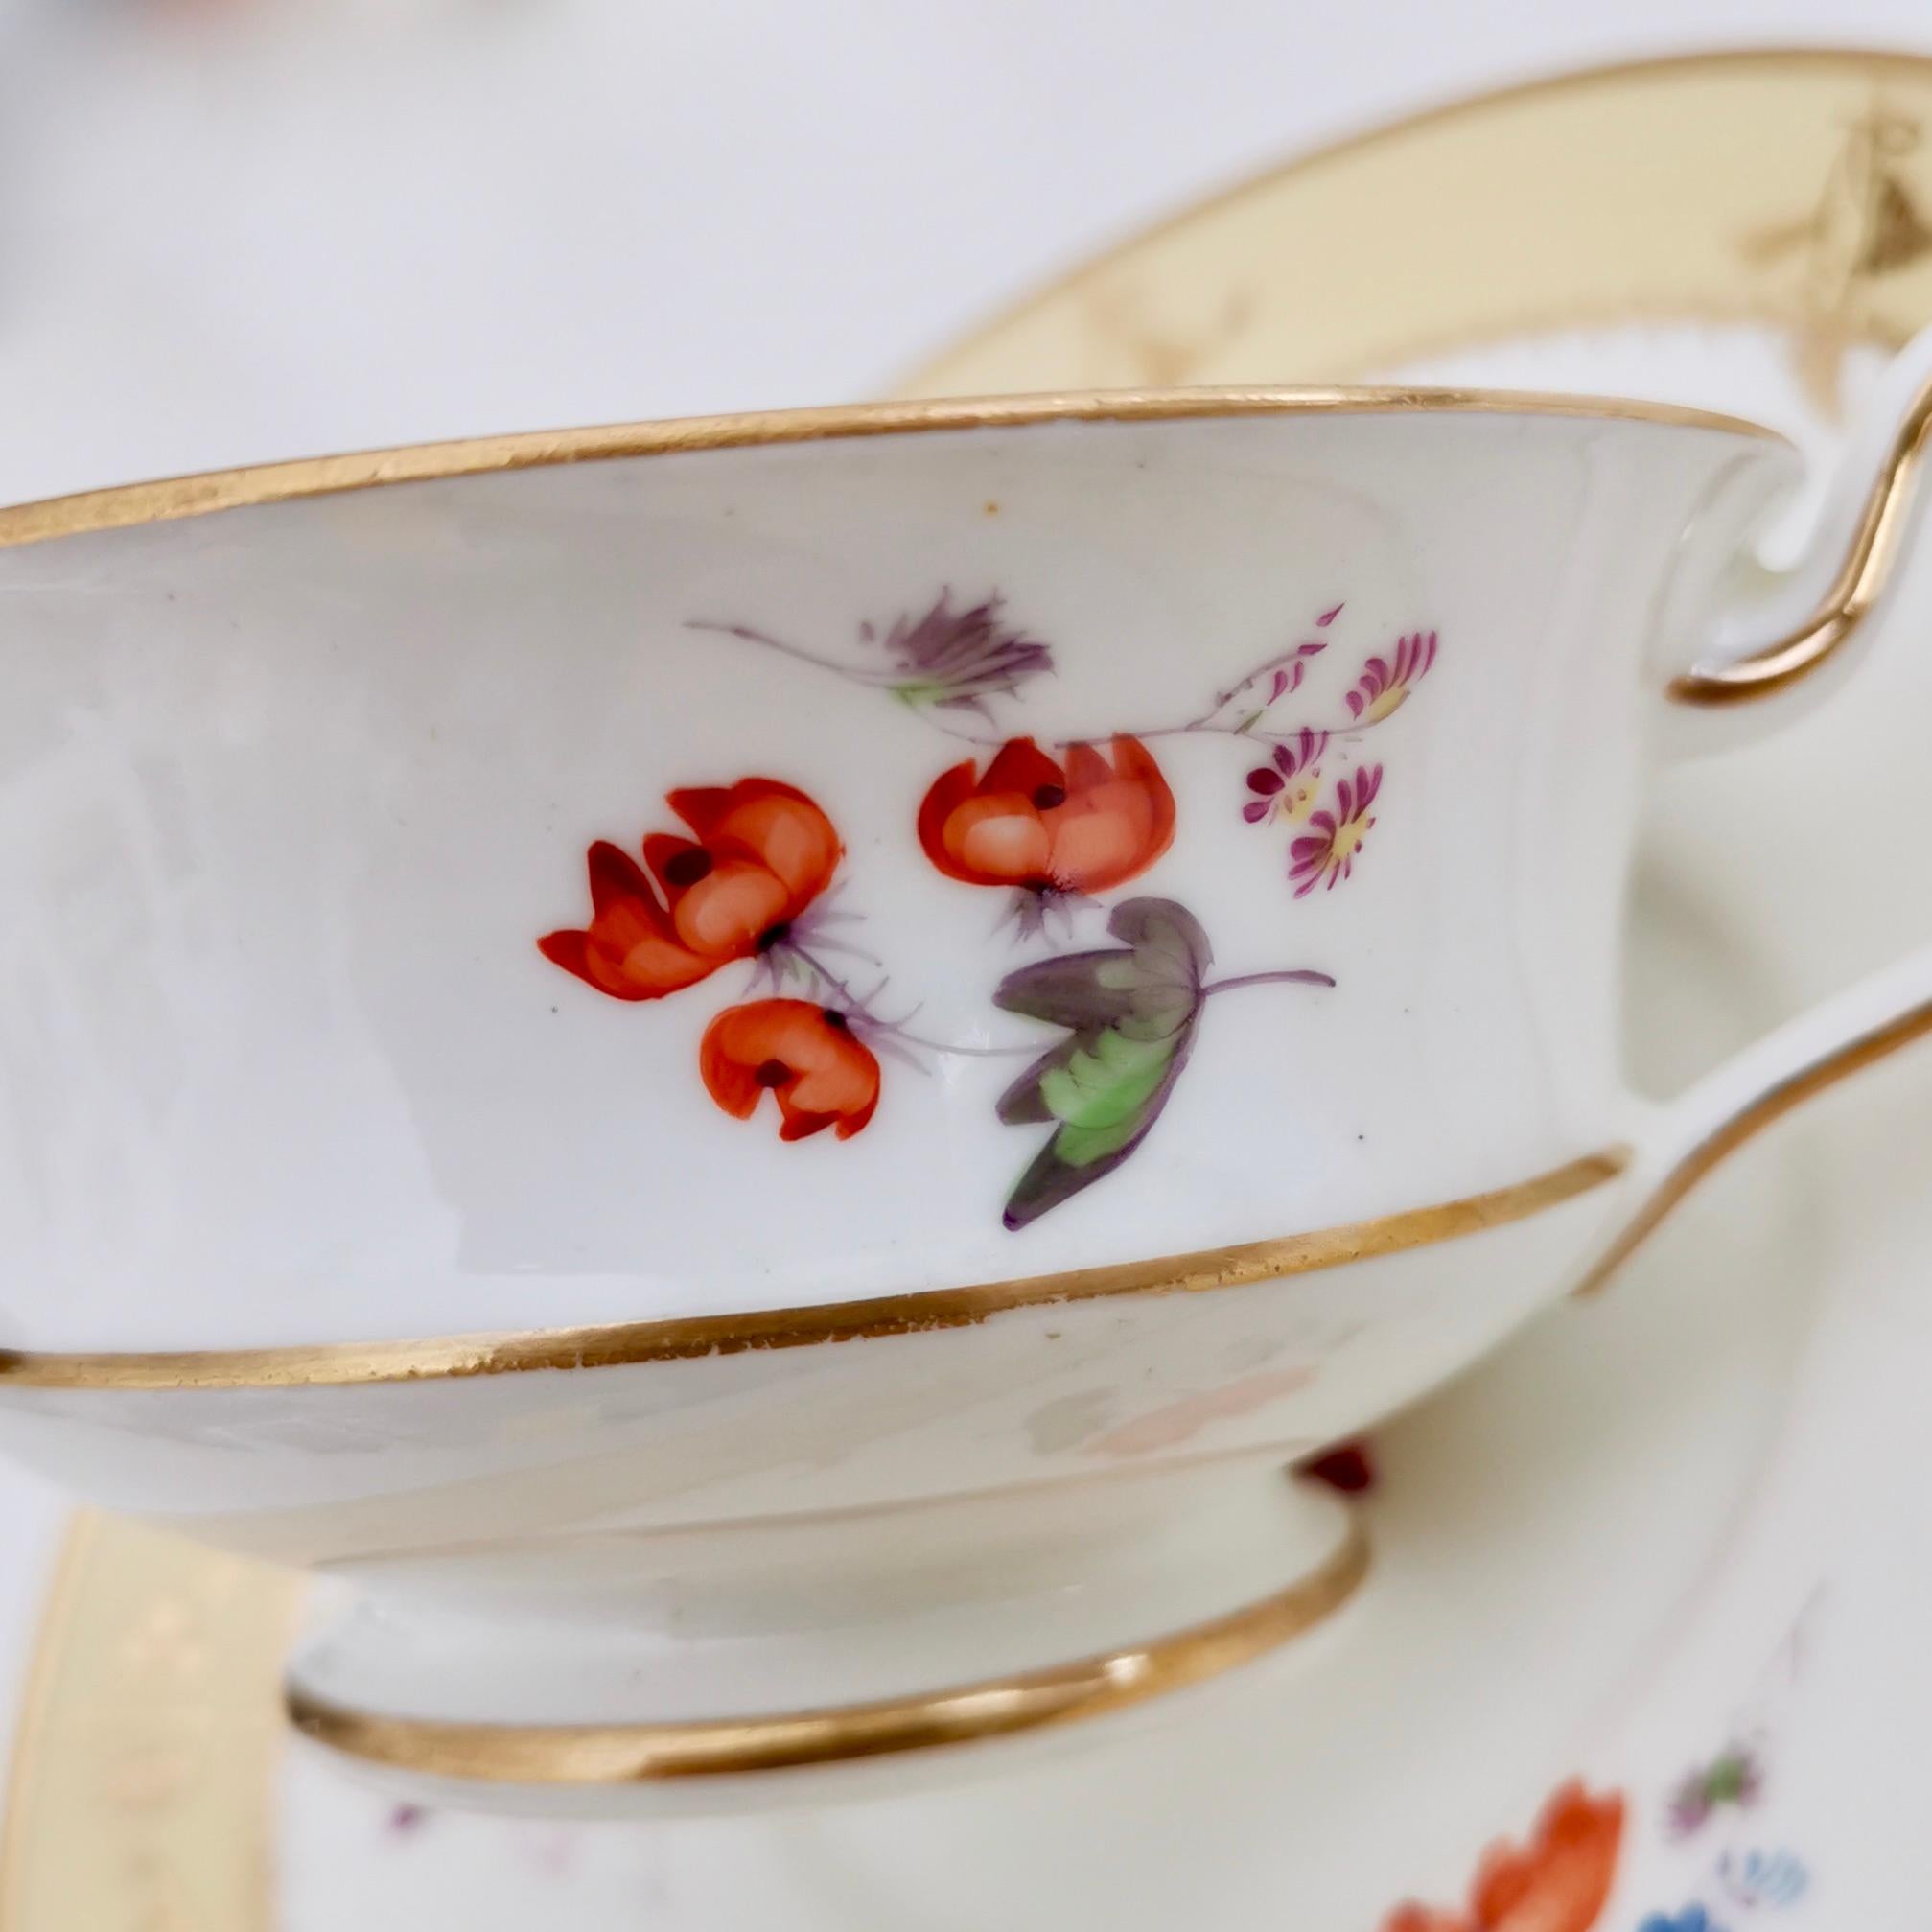 Minton Porcelain Teacup, Yellow with Hand Painted Flowers, Regency, circa 1825 5